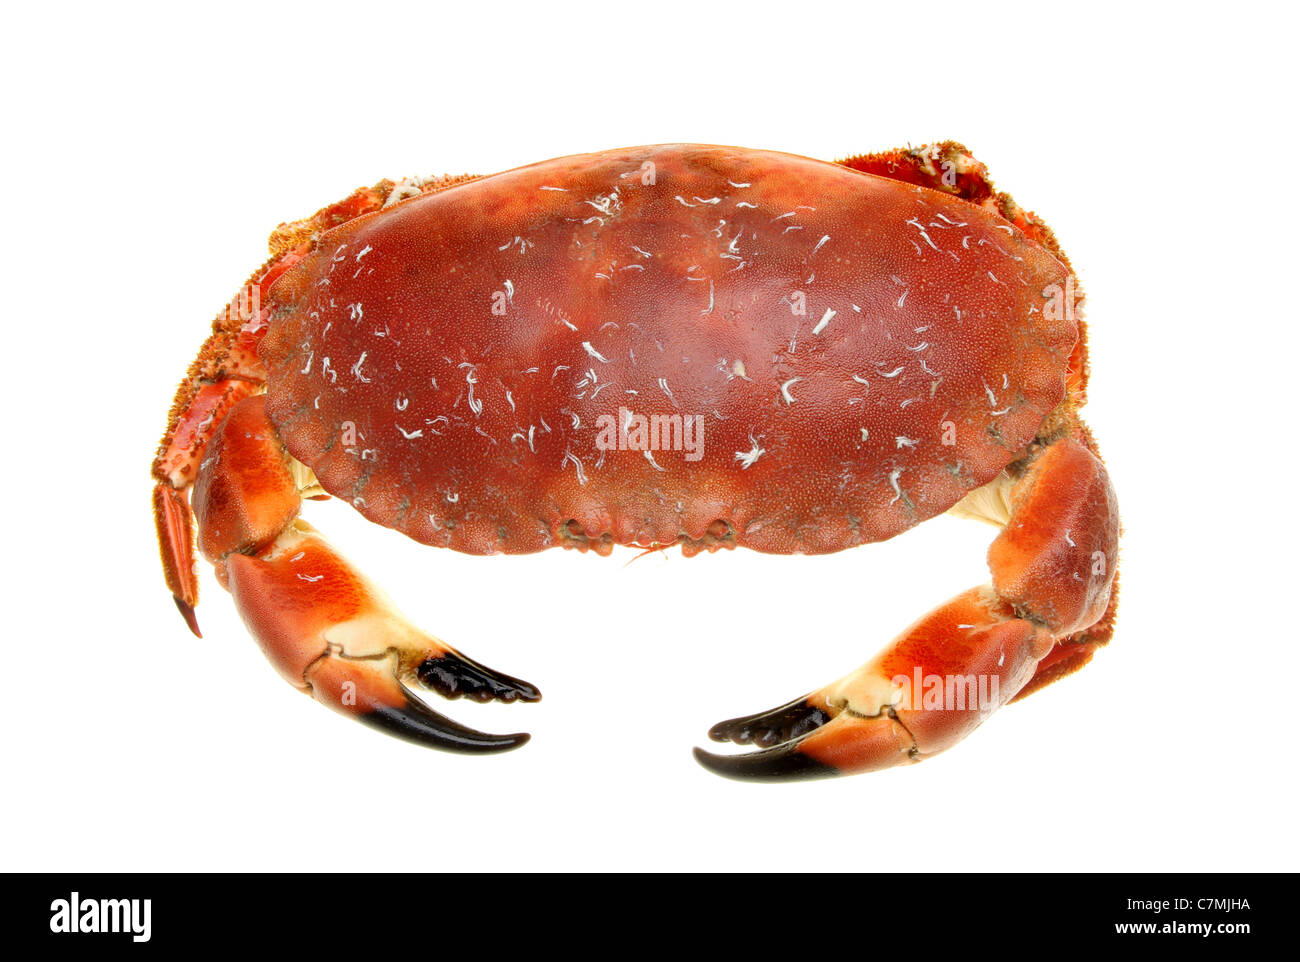 Cooked brown crab viewed from above isolated against white Stock Photo